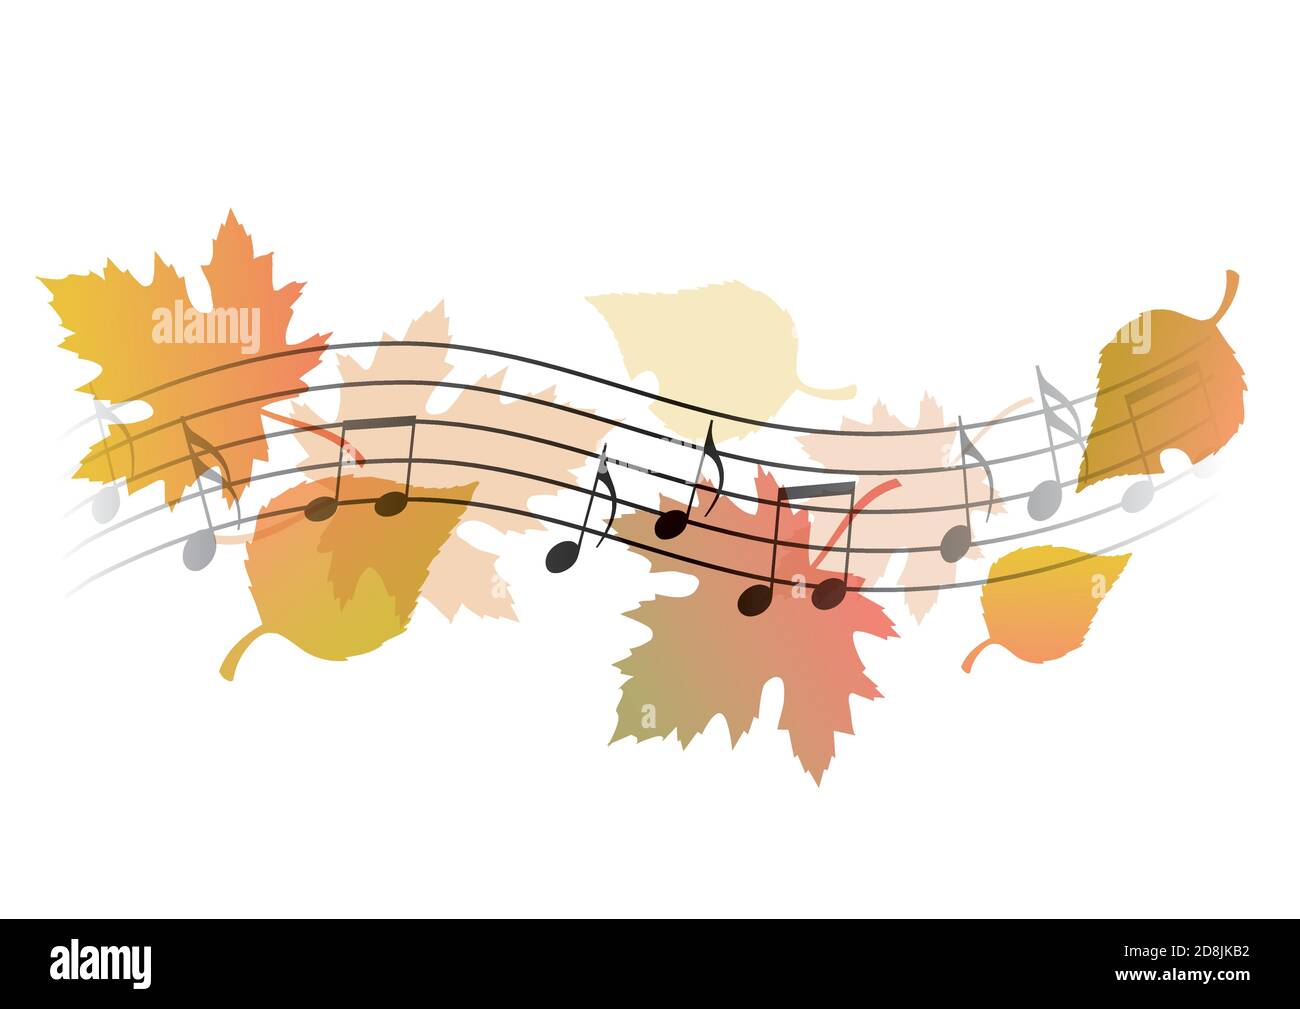 Autumn melodies, musical notes Illustration of wavy music notation with autumn leaves symbolizing autumn song. Vector available. Stock Vector